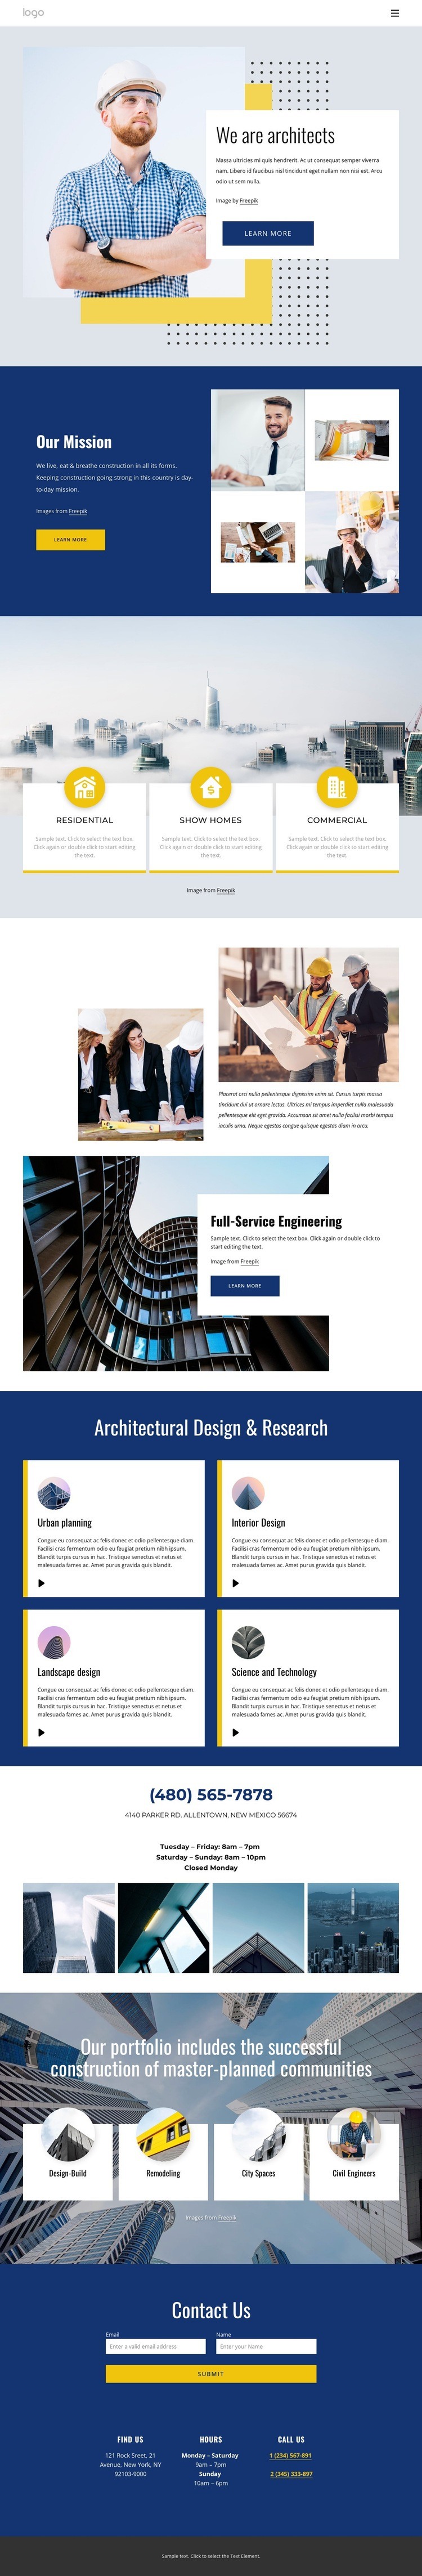 Architectural projects Web Page Design